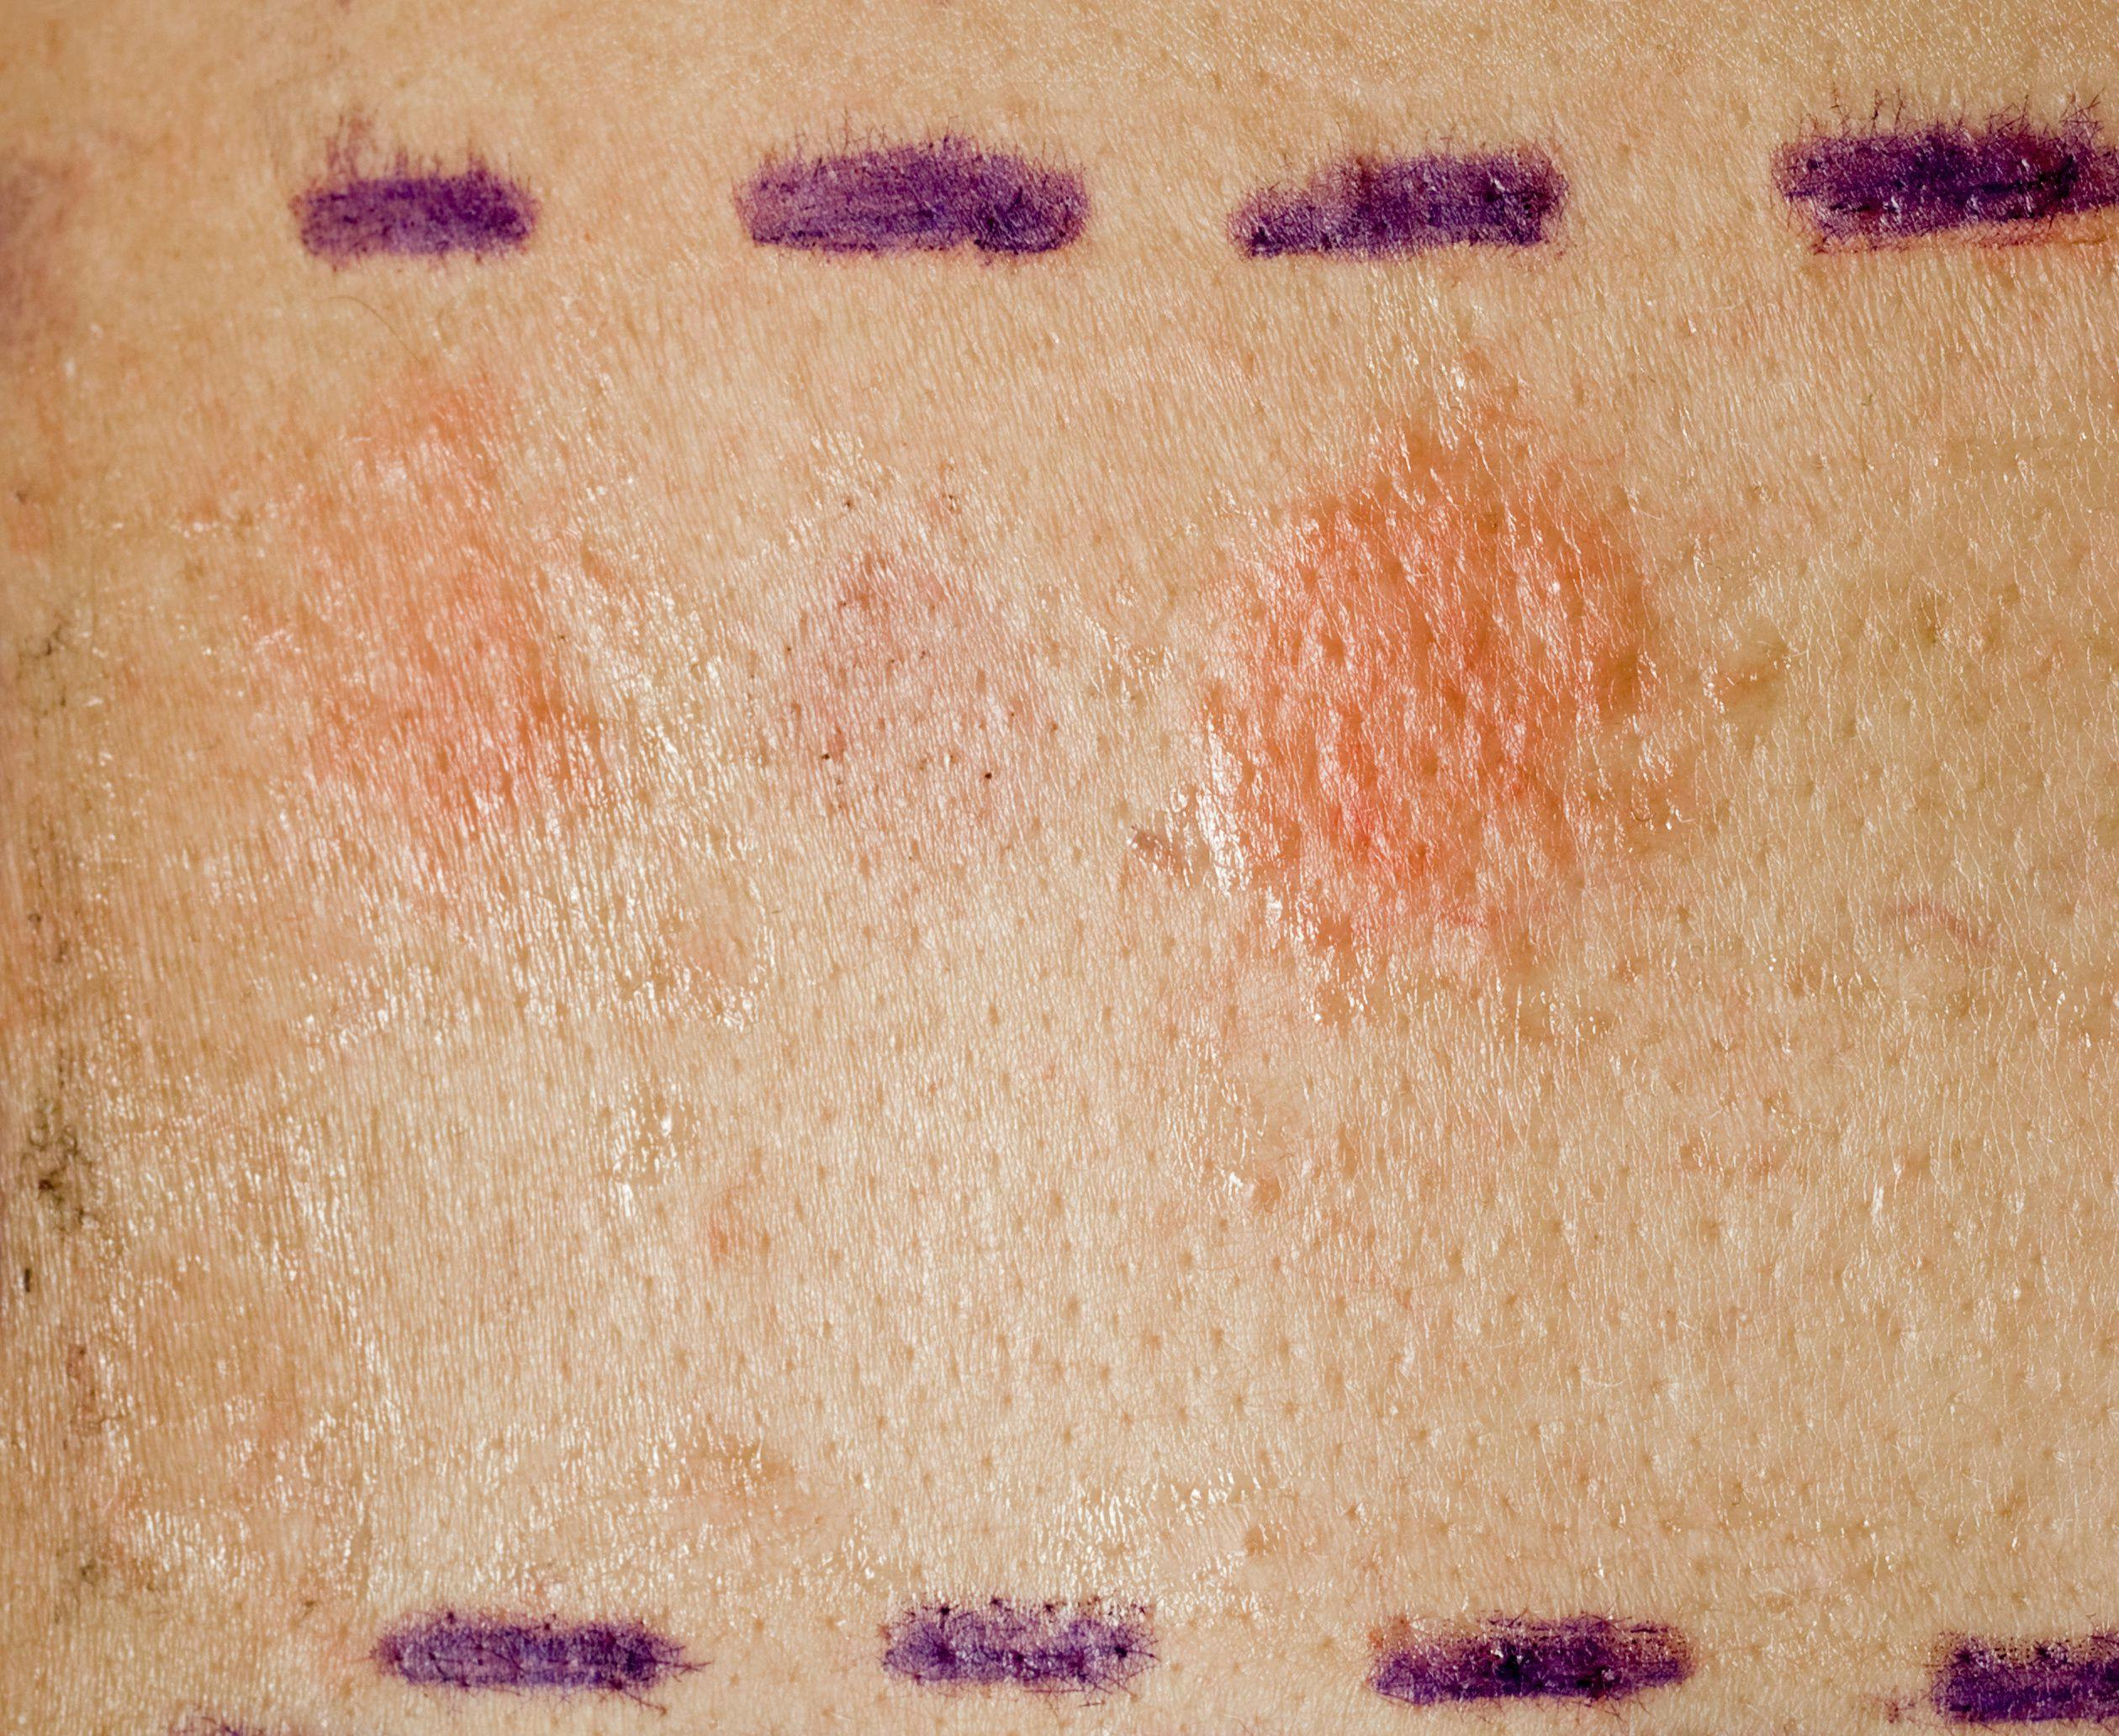  Patch Testing for Contact Dermatitis and Biomedical Devices Allergens   